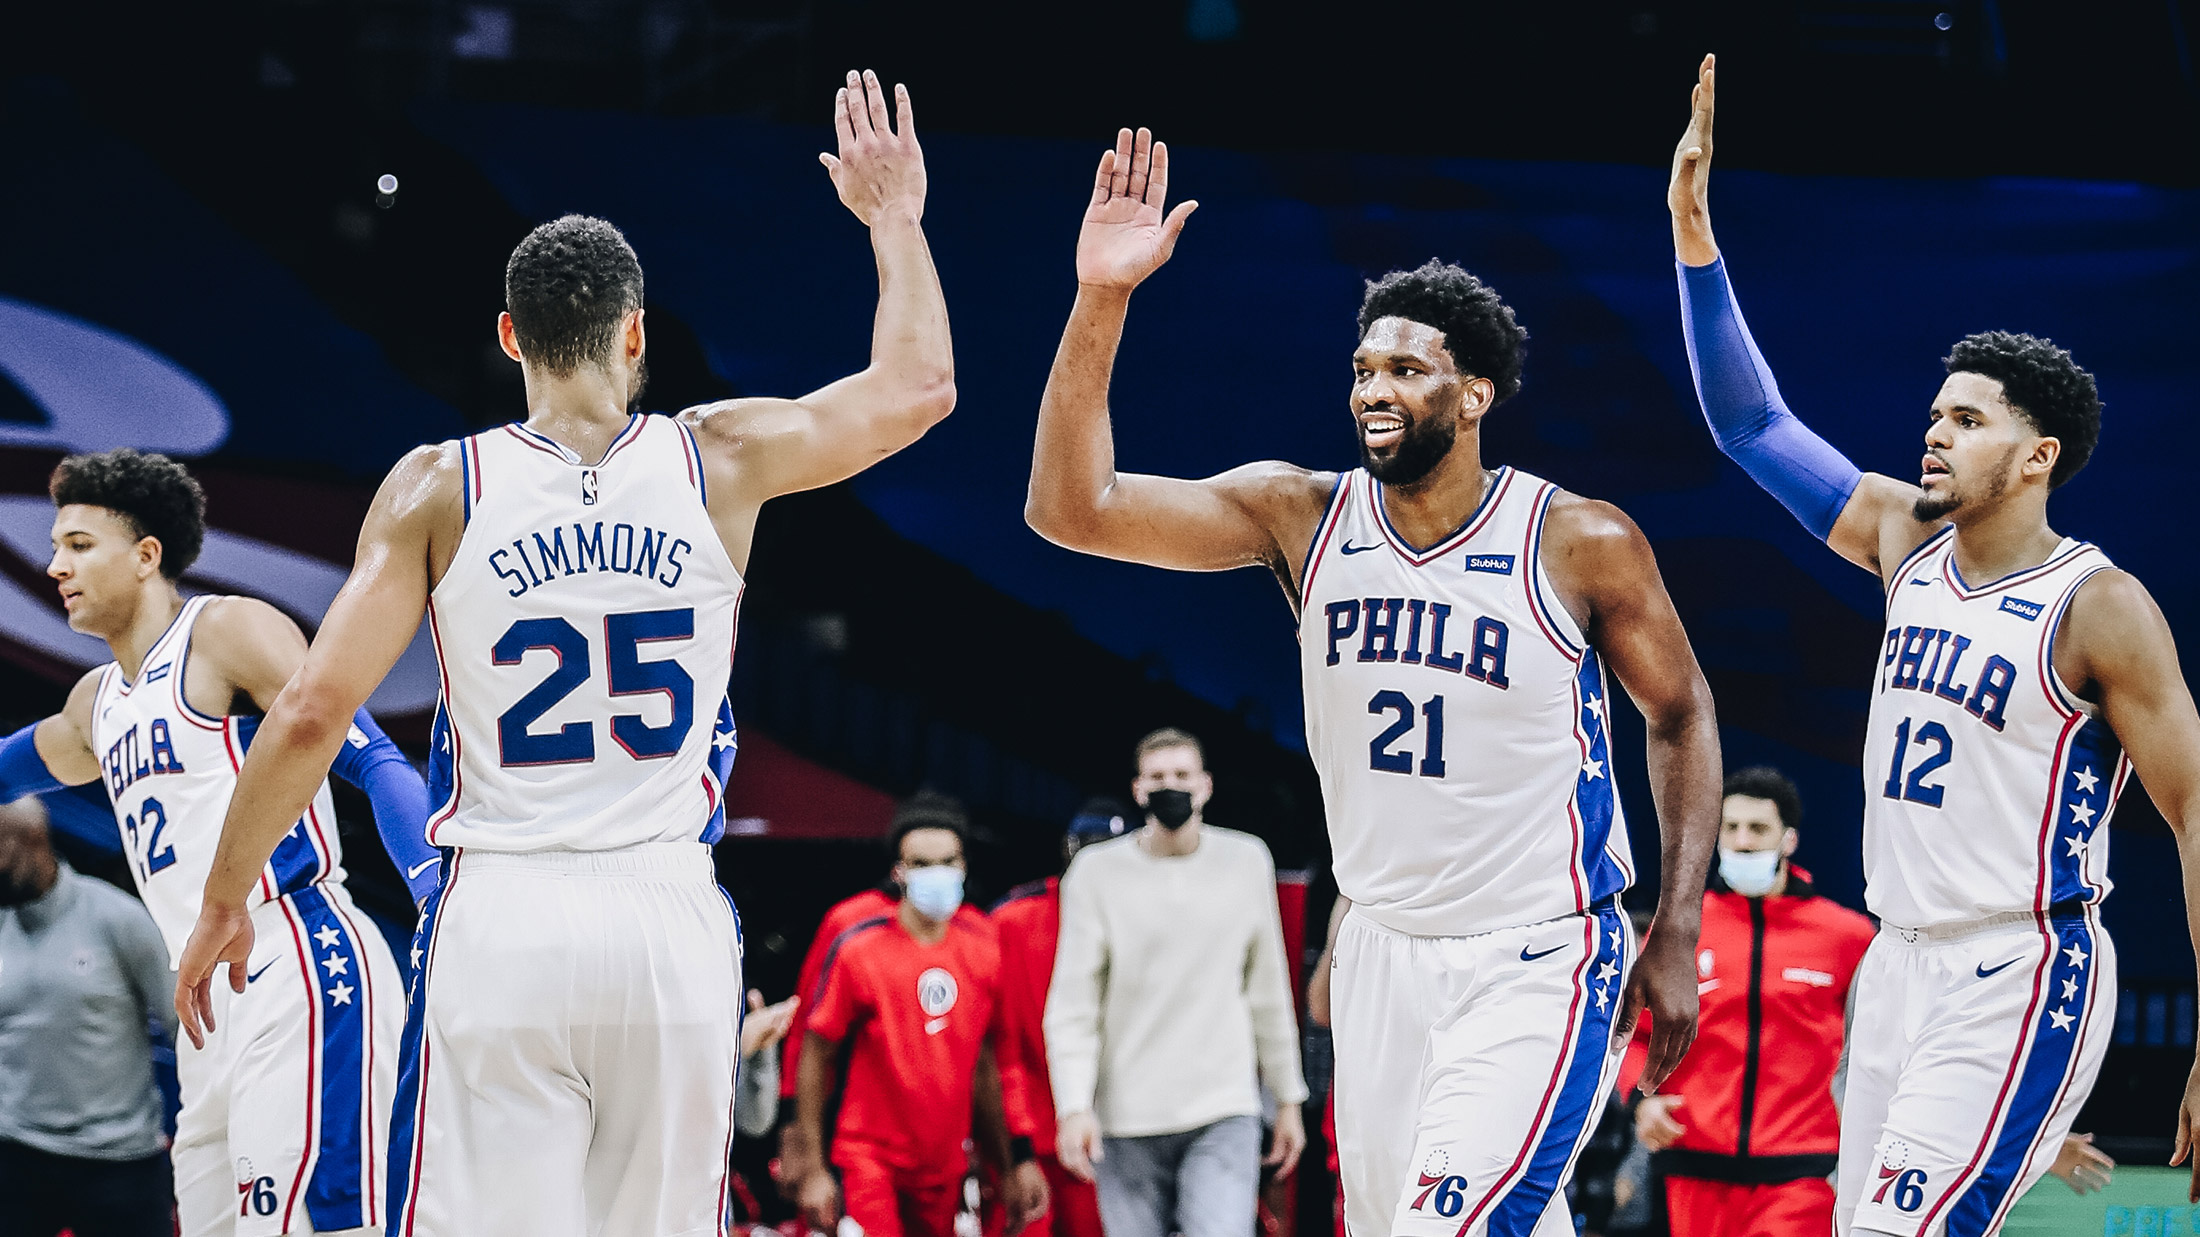 Philadelphia 76ers' New Strategy After James Harden Winning Streak Sparks Big Moves and Rising Stars---